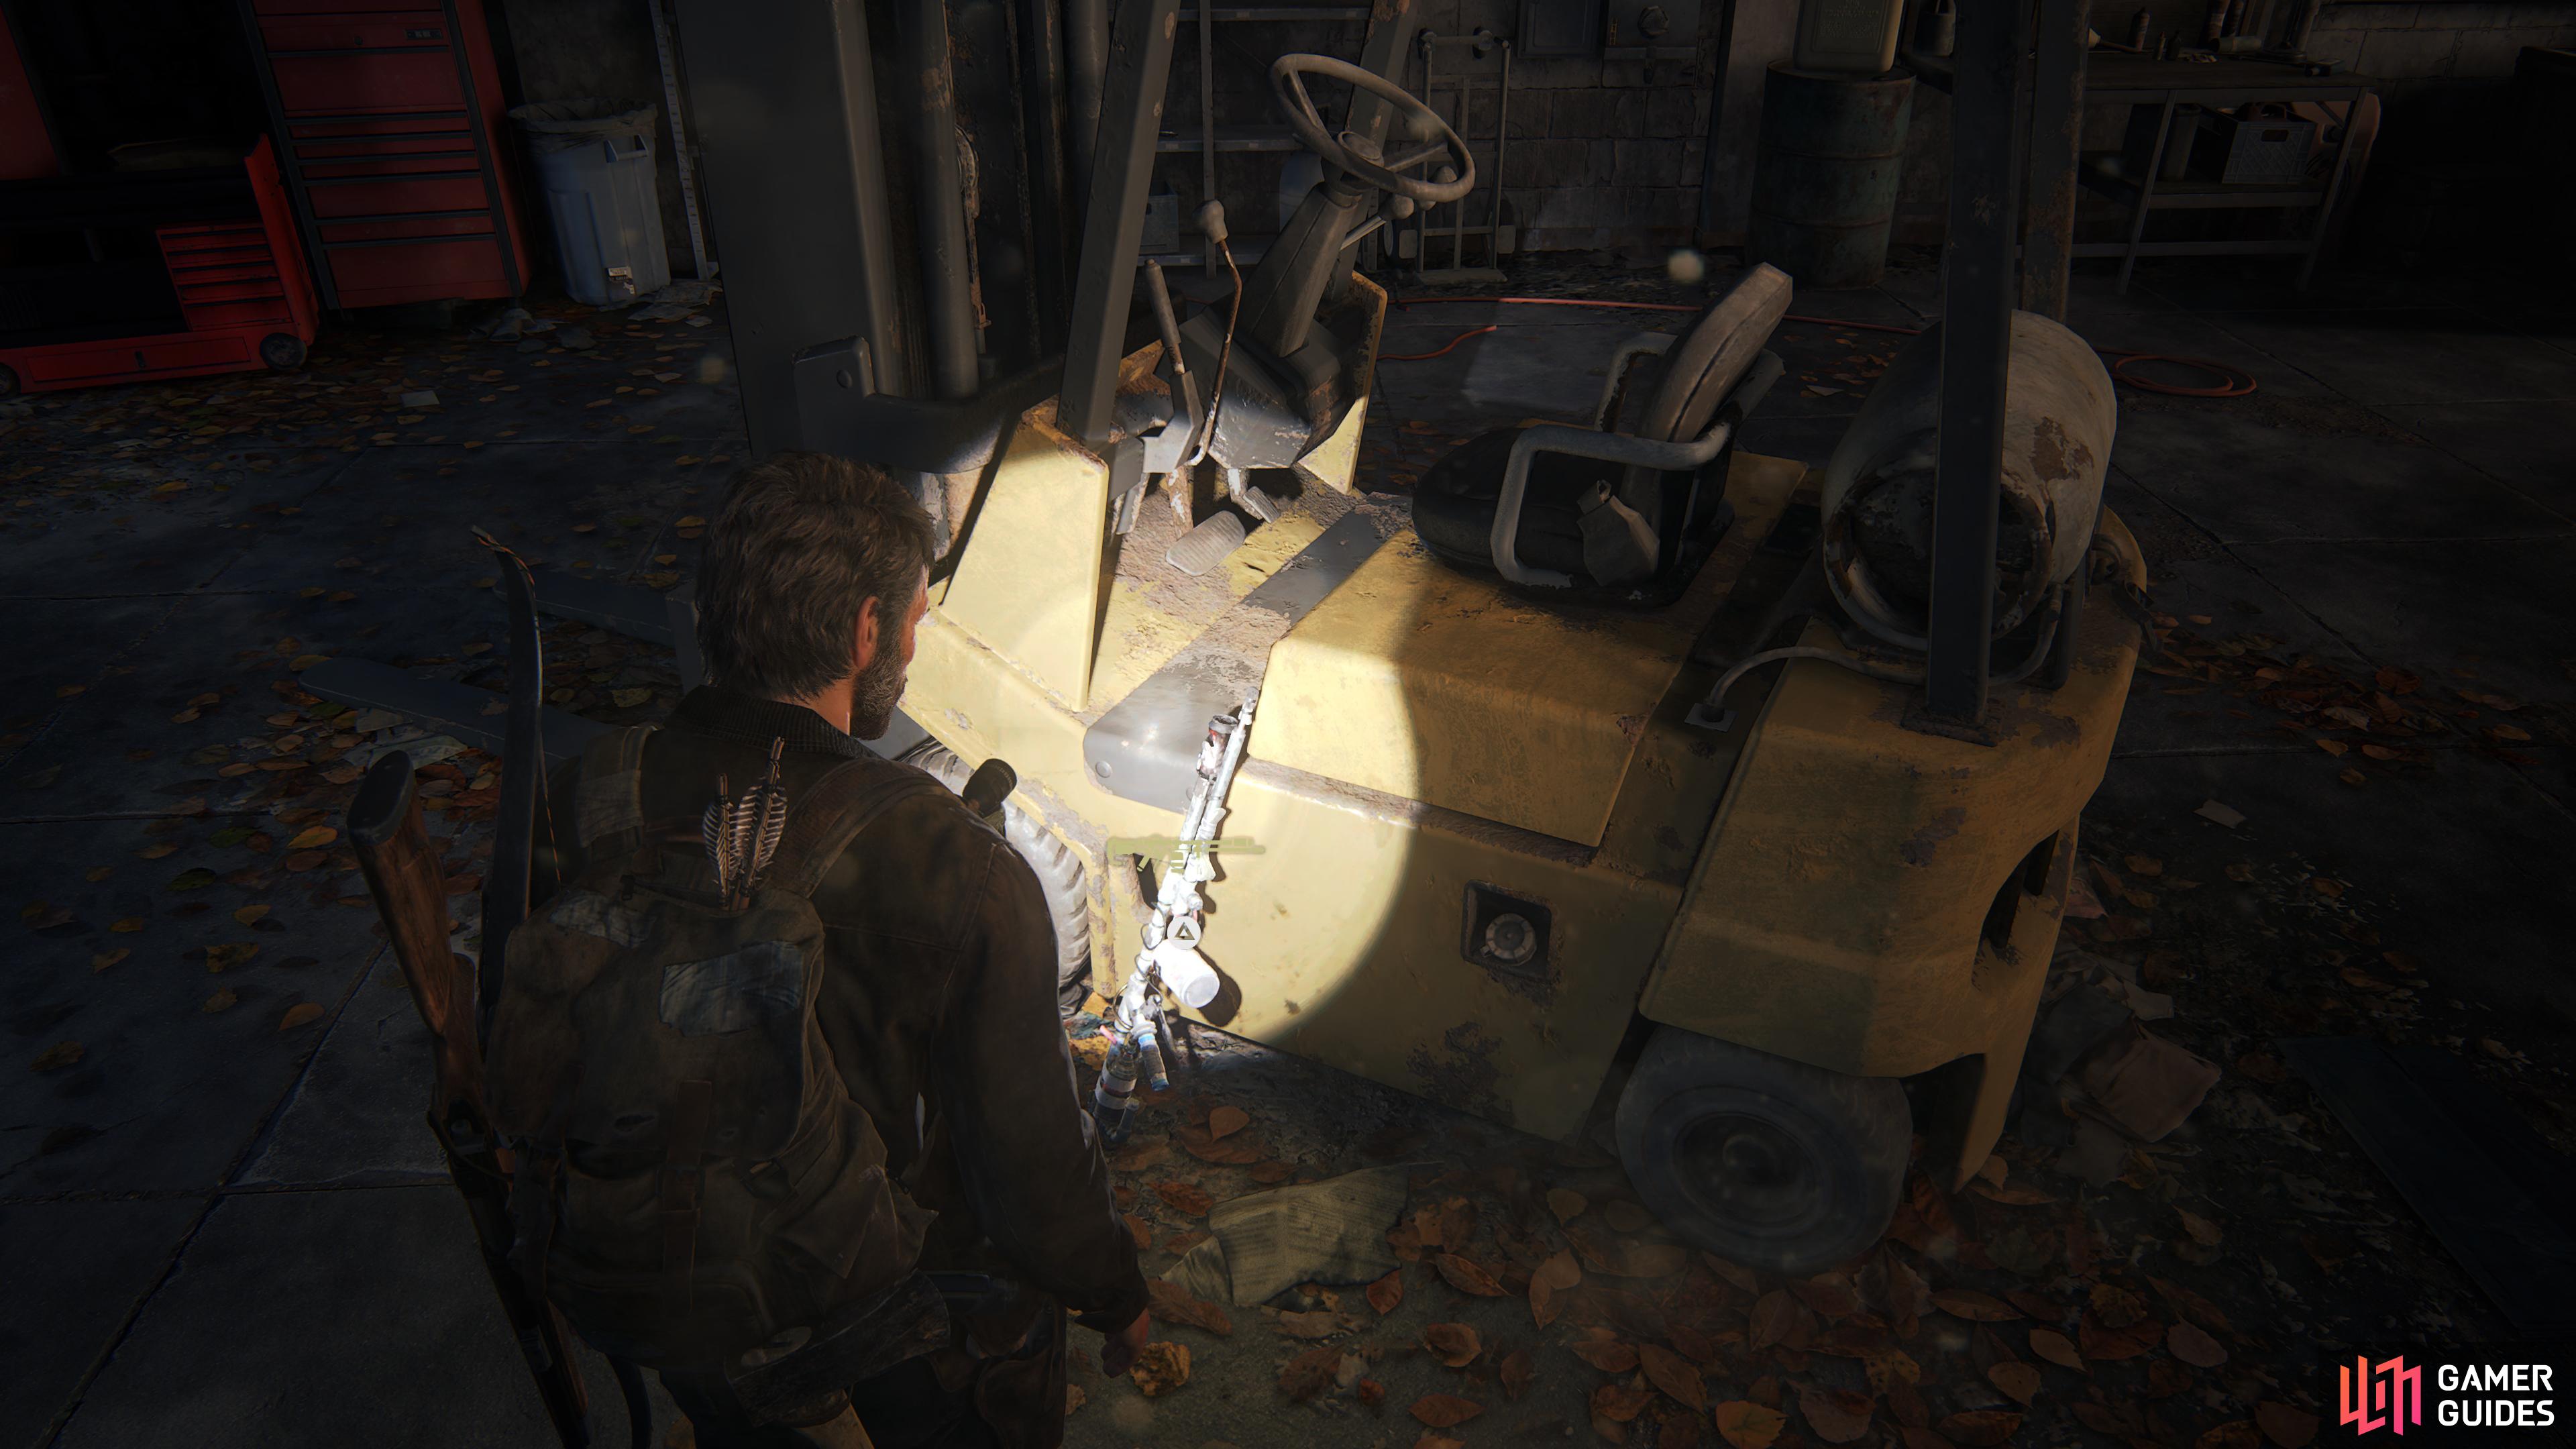 The Flamethrower can be found leaning against a forklift.